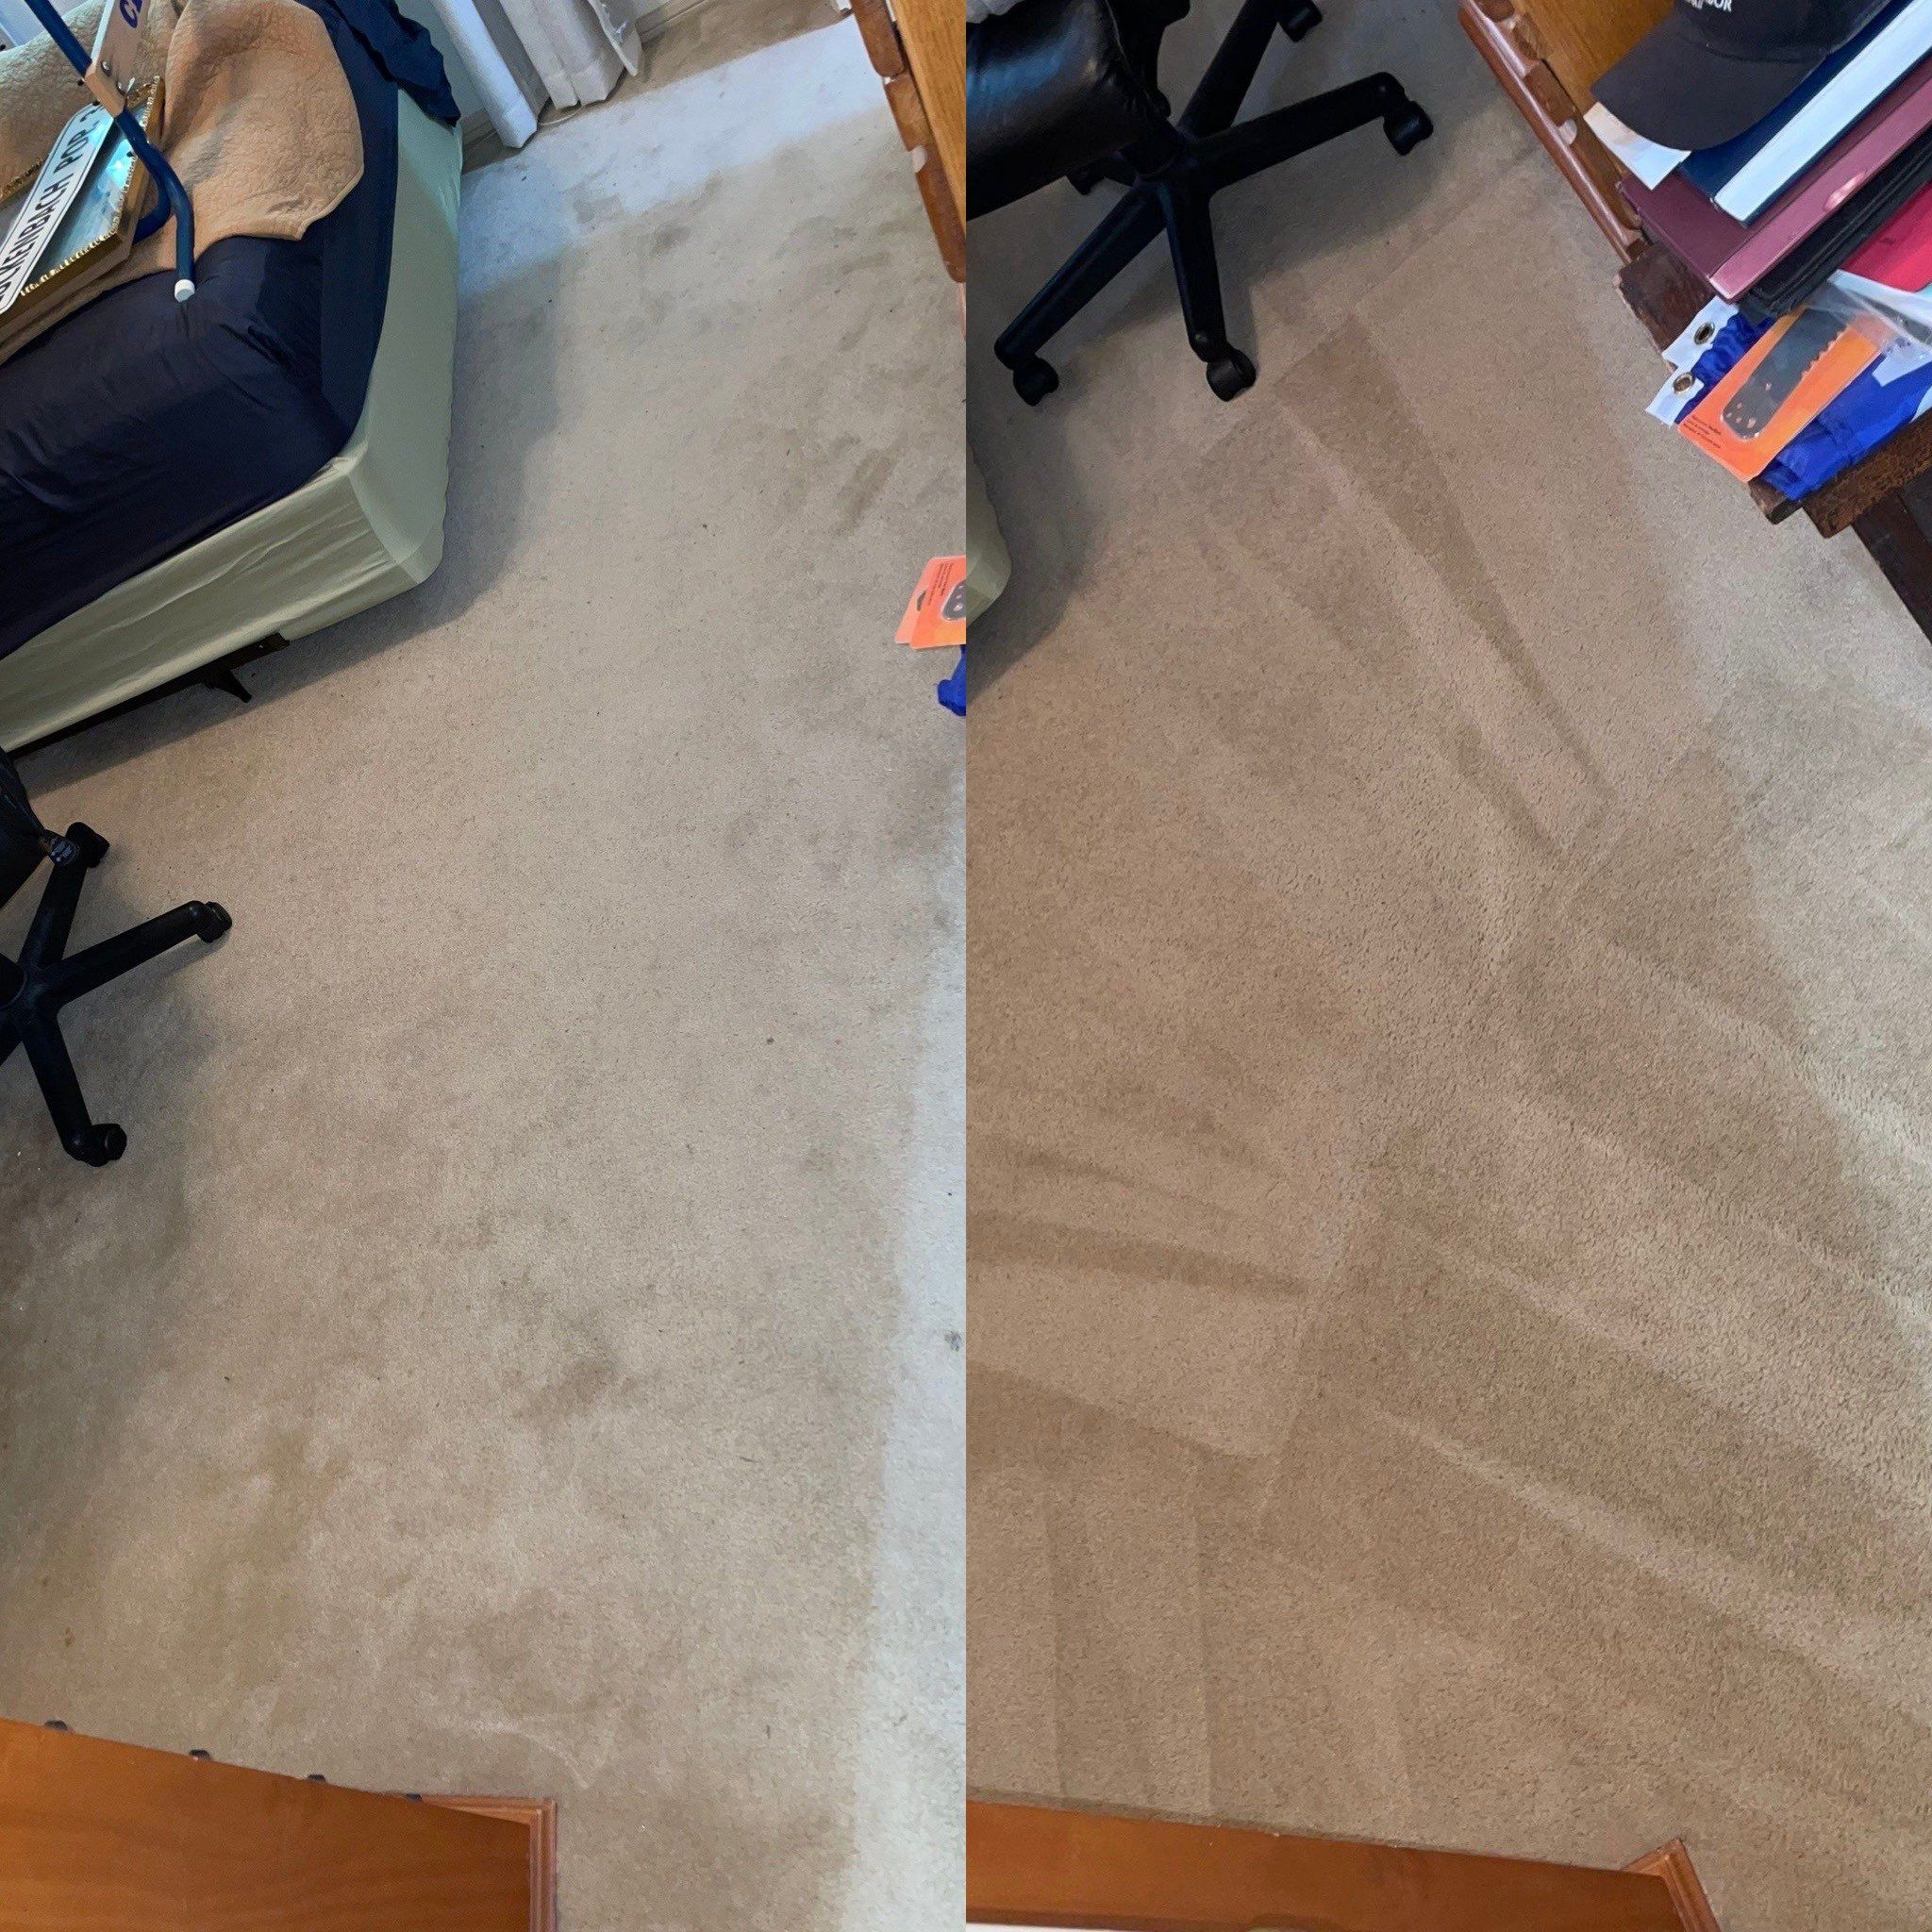 carpet cleaning service leaving carpets visibly cleaner and refreshed in a home environment based on before and after comparison